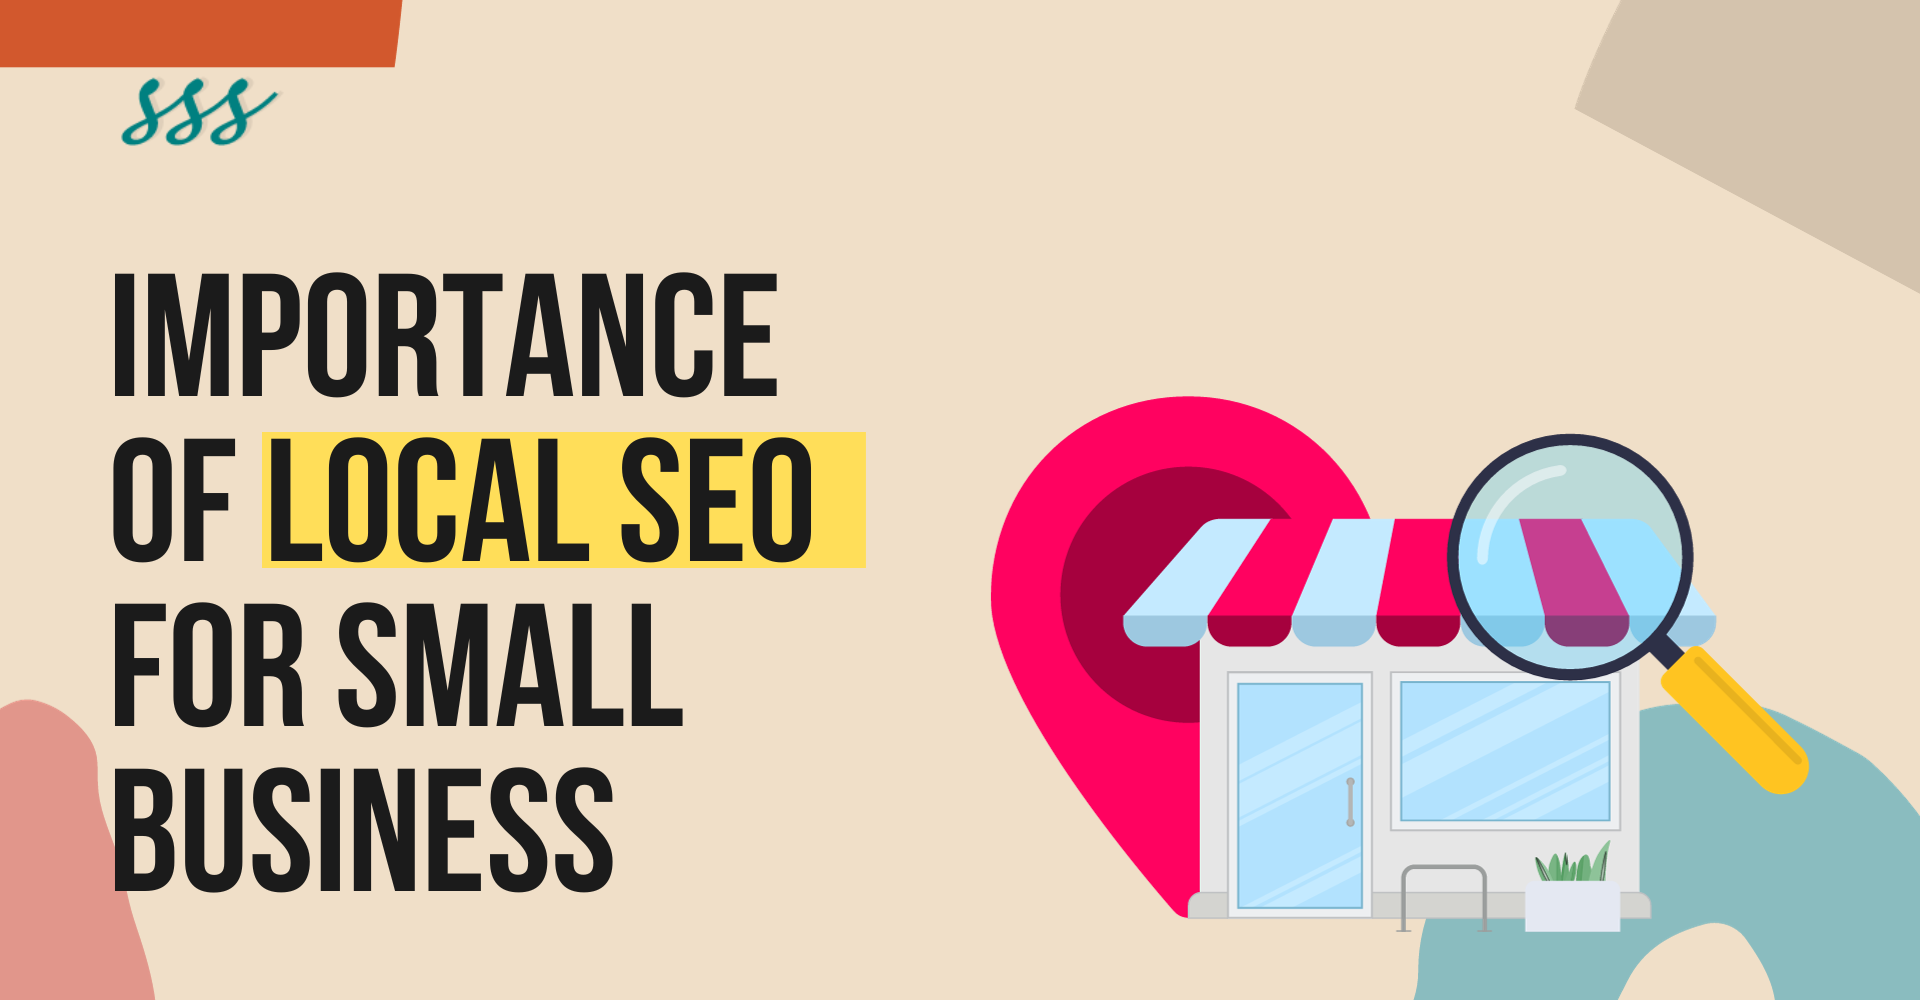 Local SEO Is Important for Small Businesses